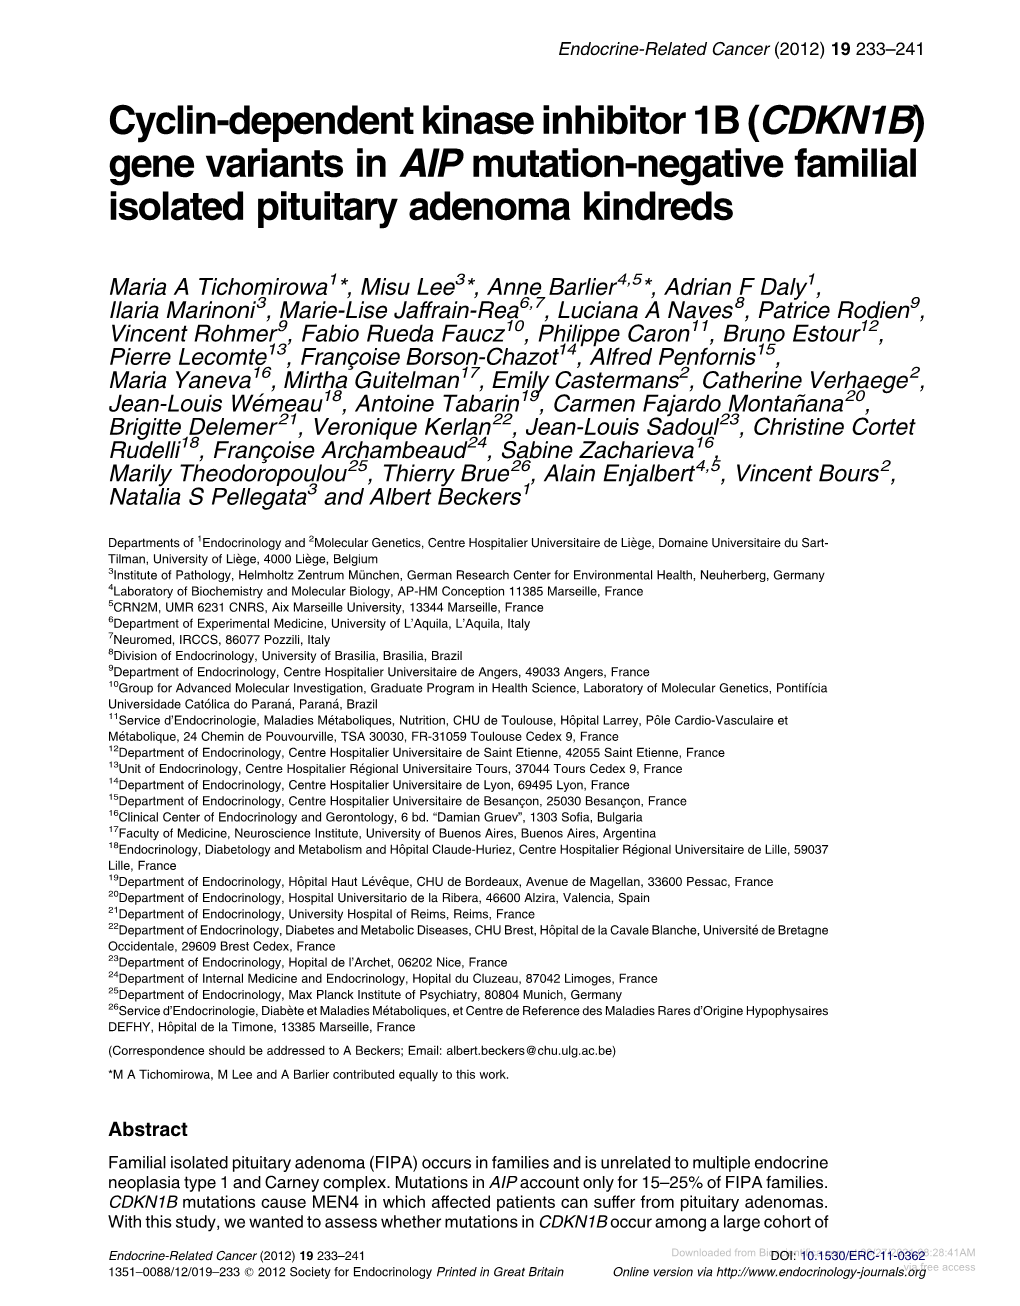 (CDKN1B) Gene Variants in AIP Mutation-Negative Familial Isolated Pituitary Adenoma Kindreds